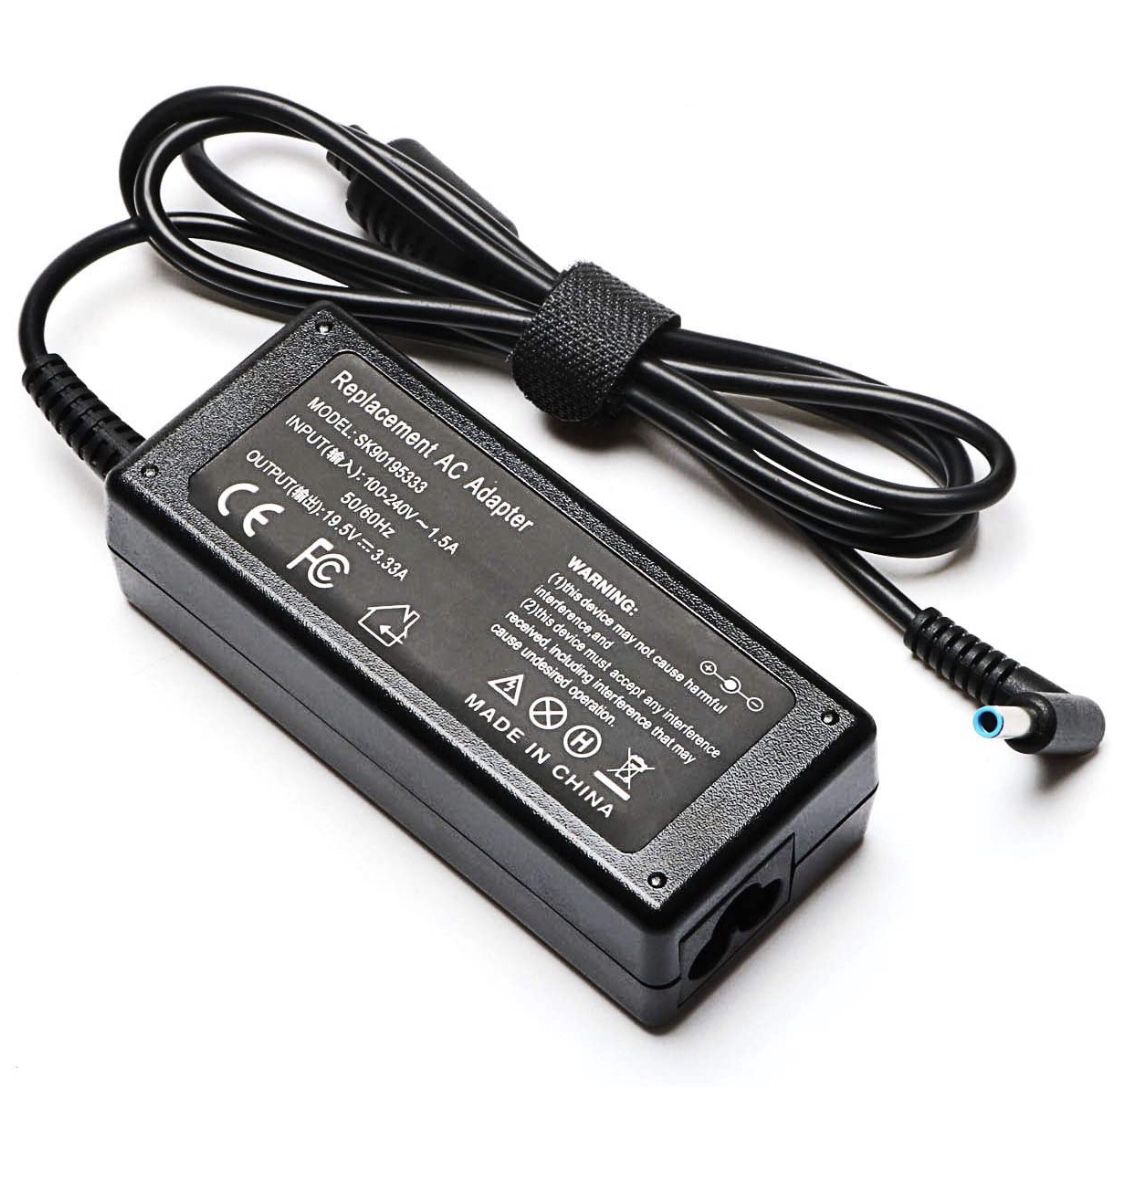 65W 19.5V Replacement AC Adapter Laptop Charger for HP Chromebook 11 14 G3 G4 G5 Probook 450 G3 G4 HP 15 15-d035dx 15-r029wm 15-f009wm 15-f023wm 15-f